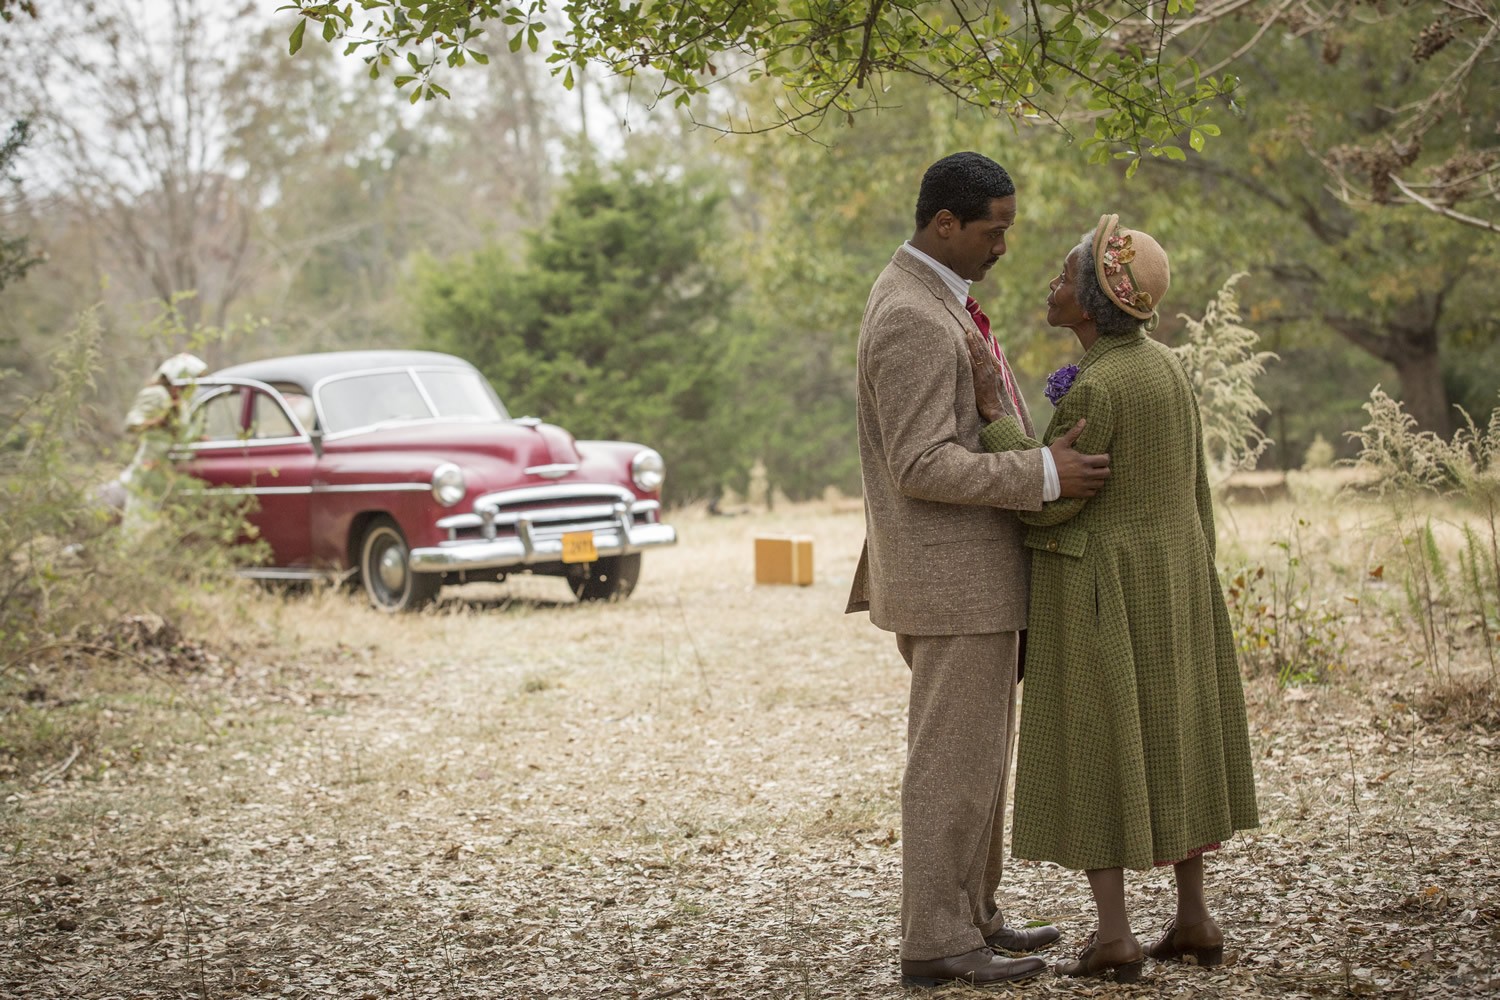 Blair Underwood stars as Ludie Watts and Cicely Tyson stars as Mrs. Watts in Lifetime's The Trip to Bountiful (2014). Photo credit by Bob Mahoney.